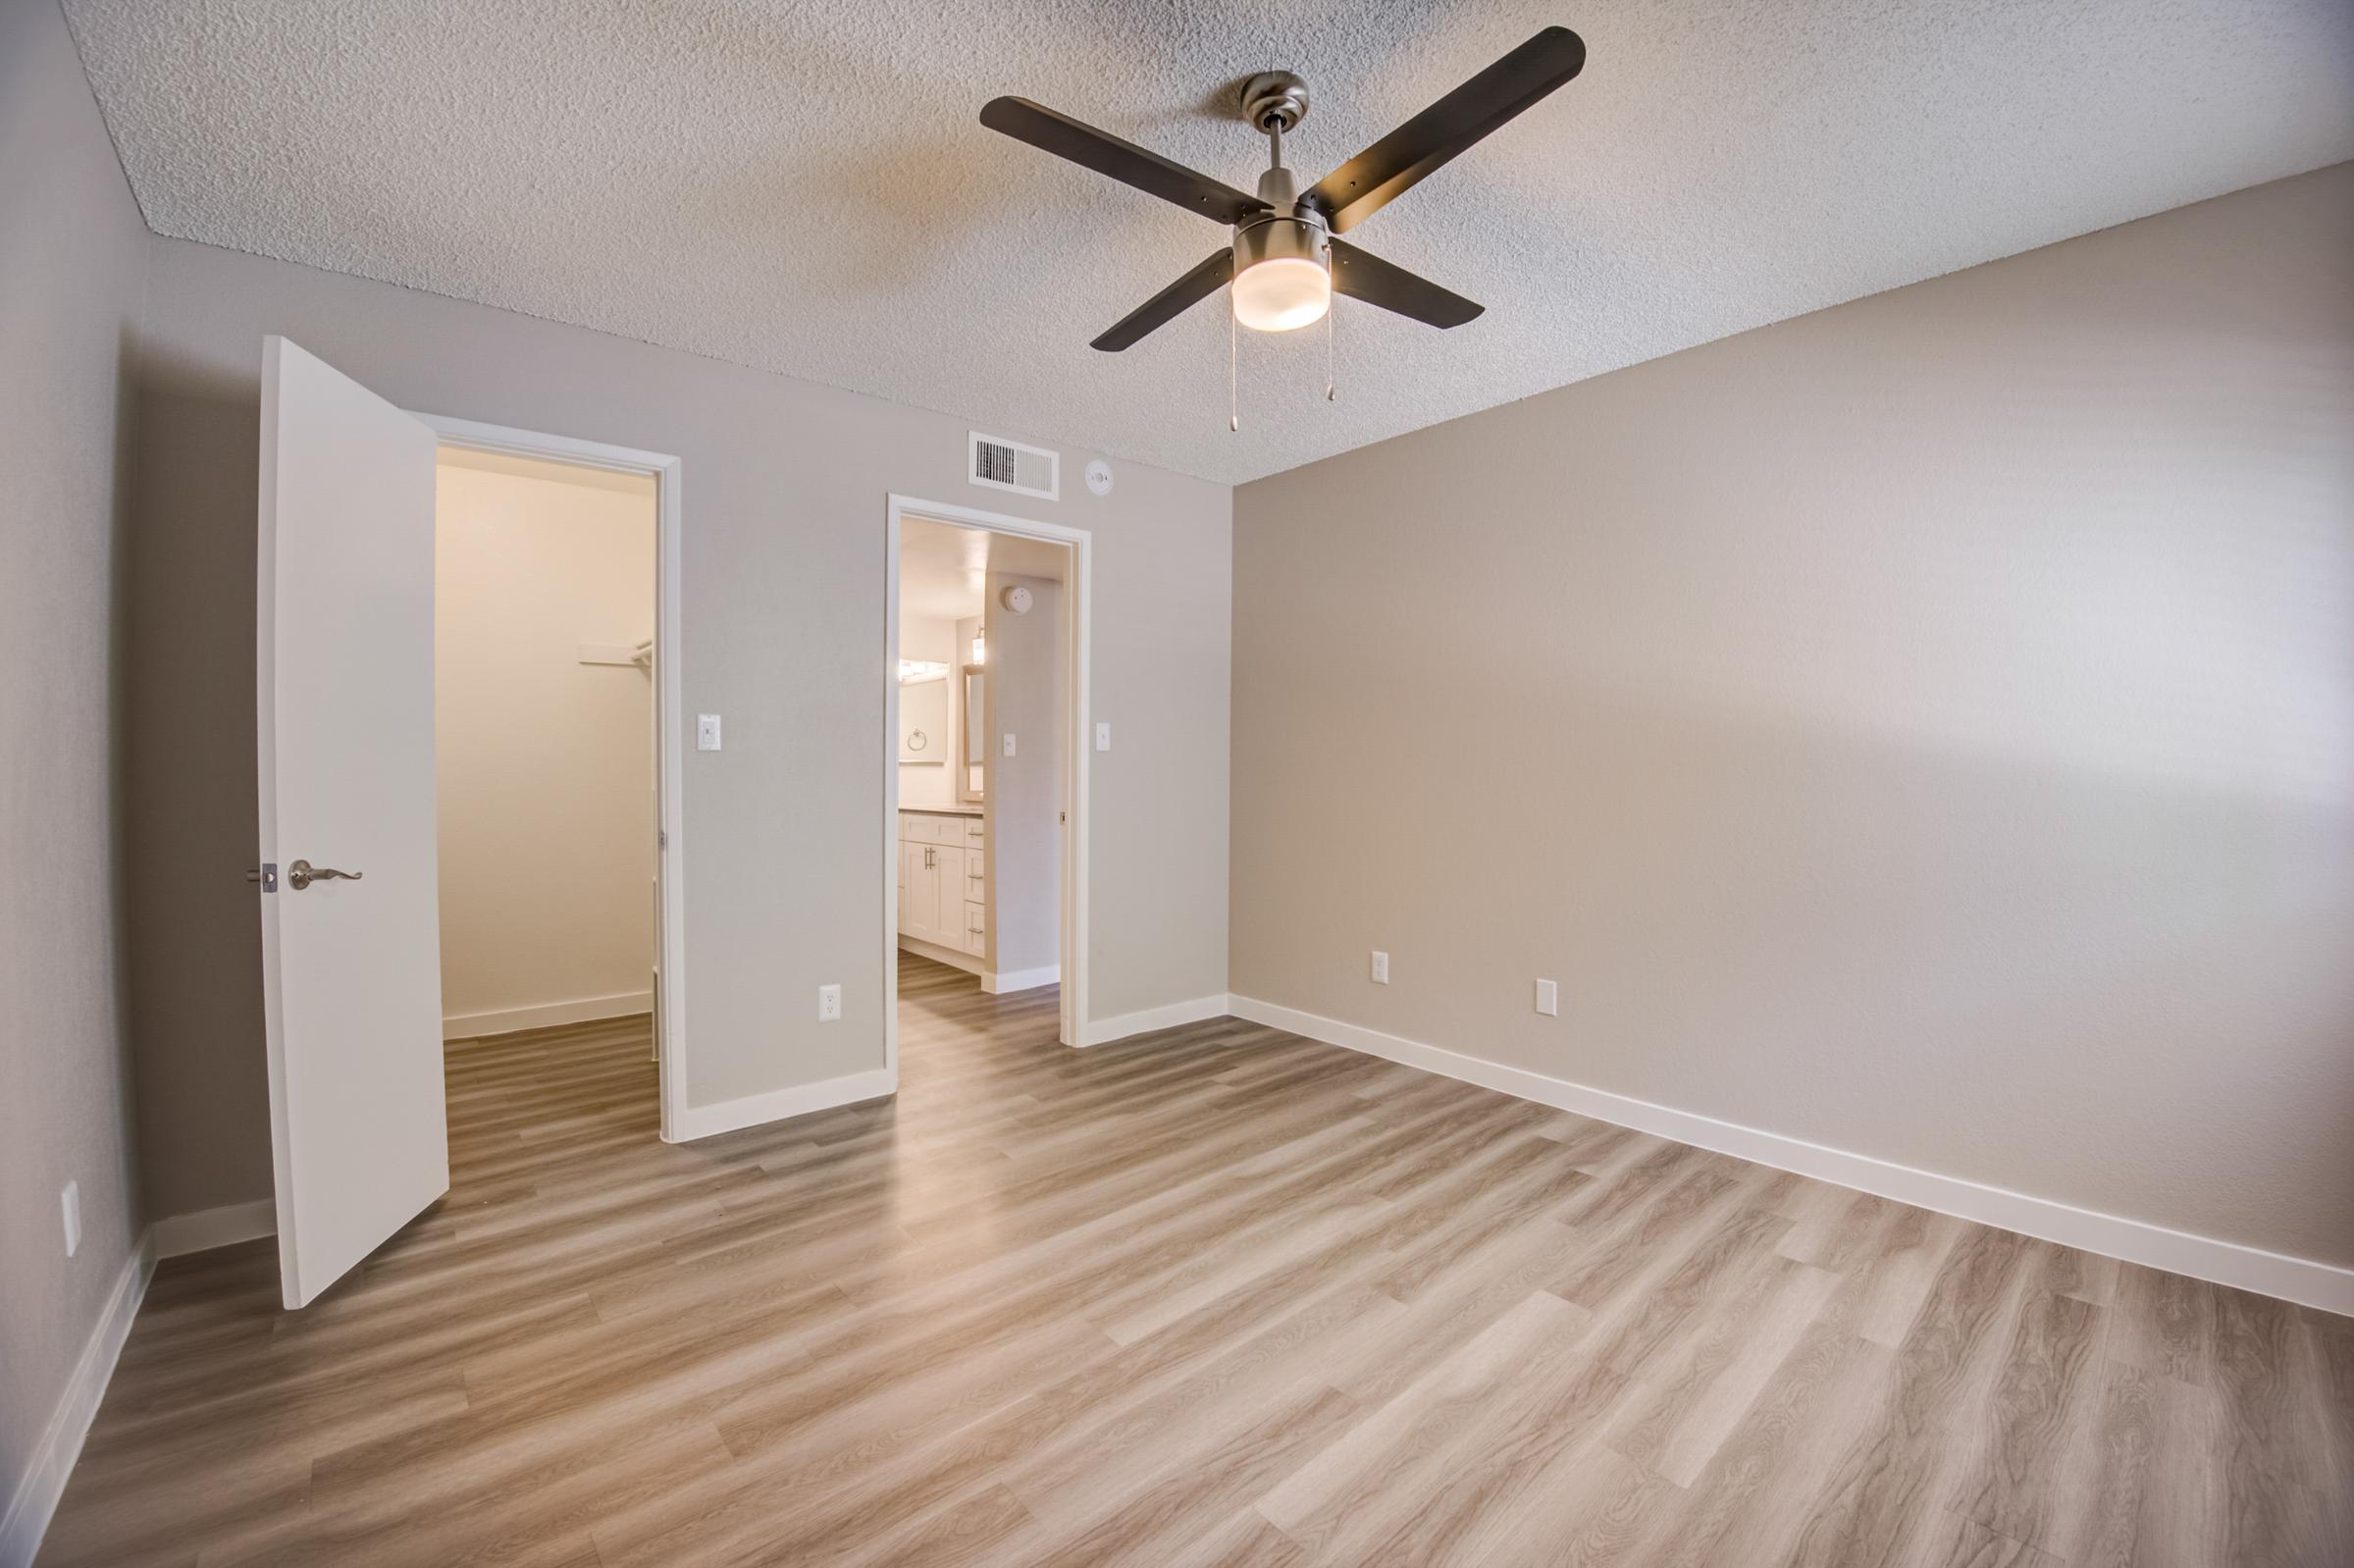 A bedroom with wood-style flooring, a ceiling fan and an ensuite bathroom at Rise at the Meadows.